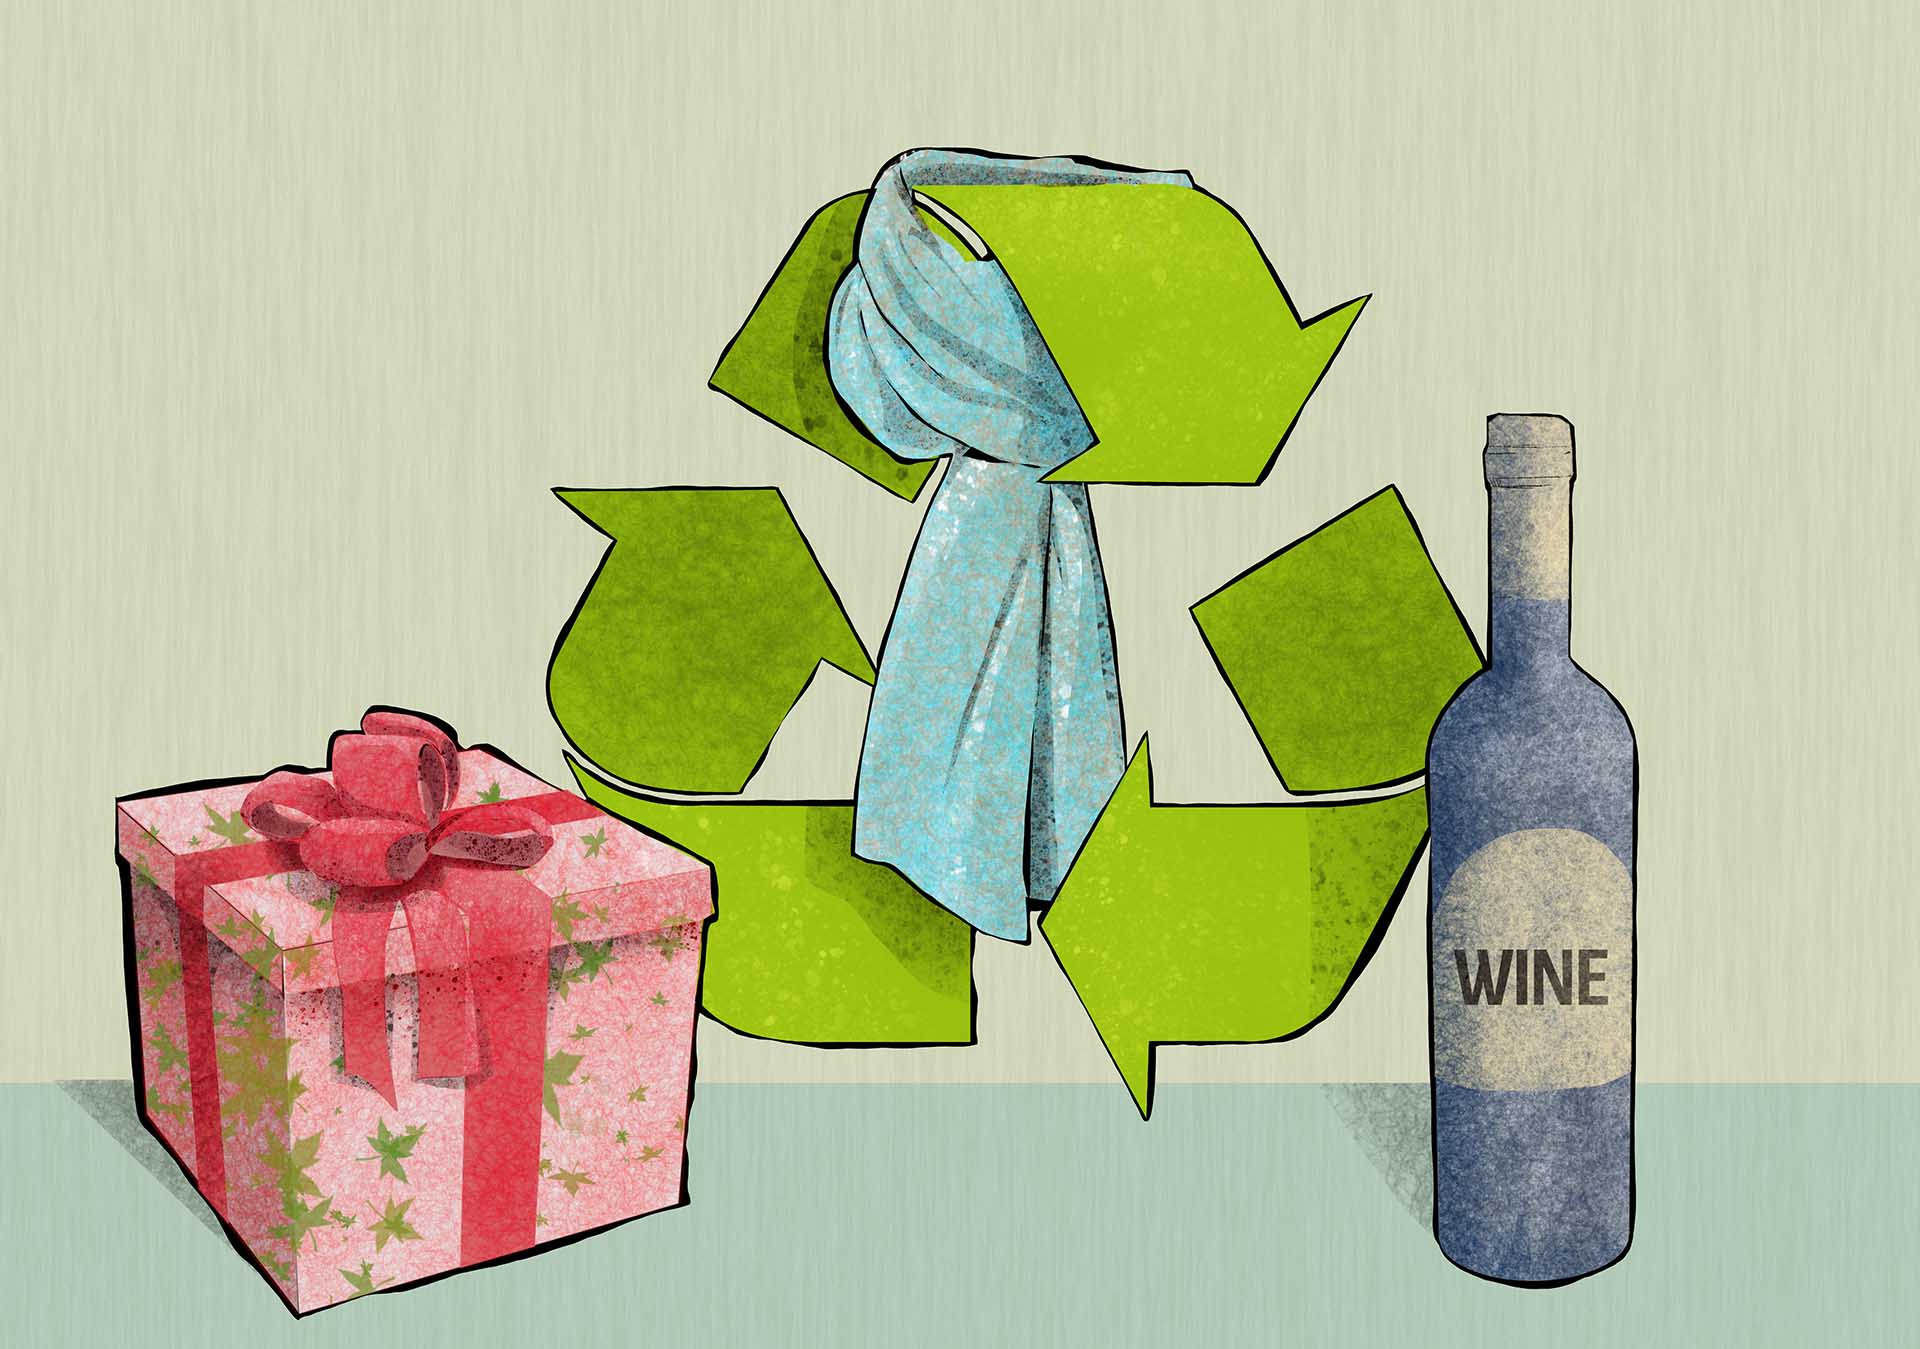 Illustration of gifts to recycle and reuse